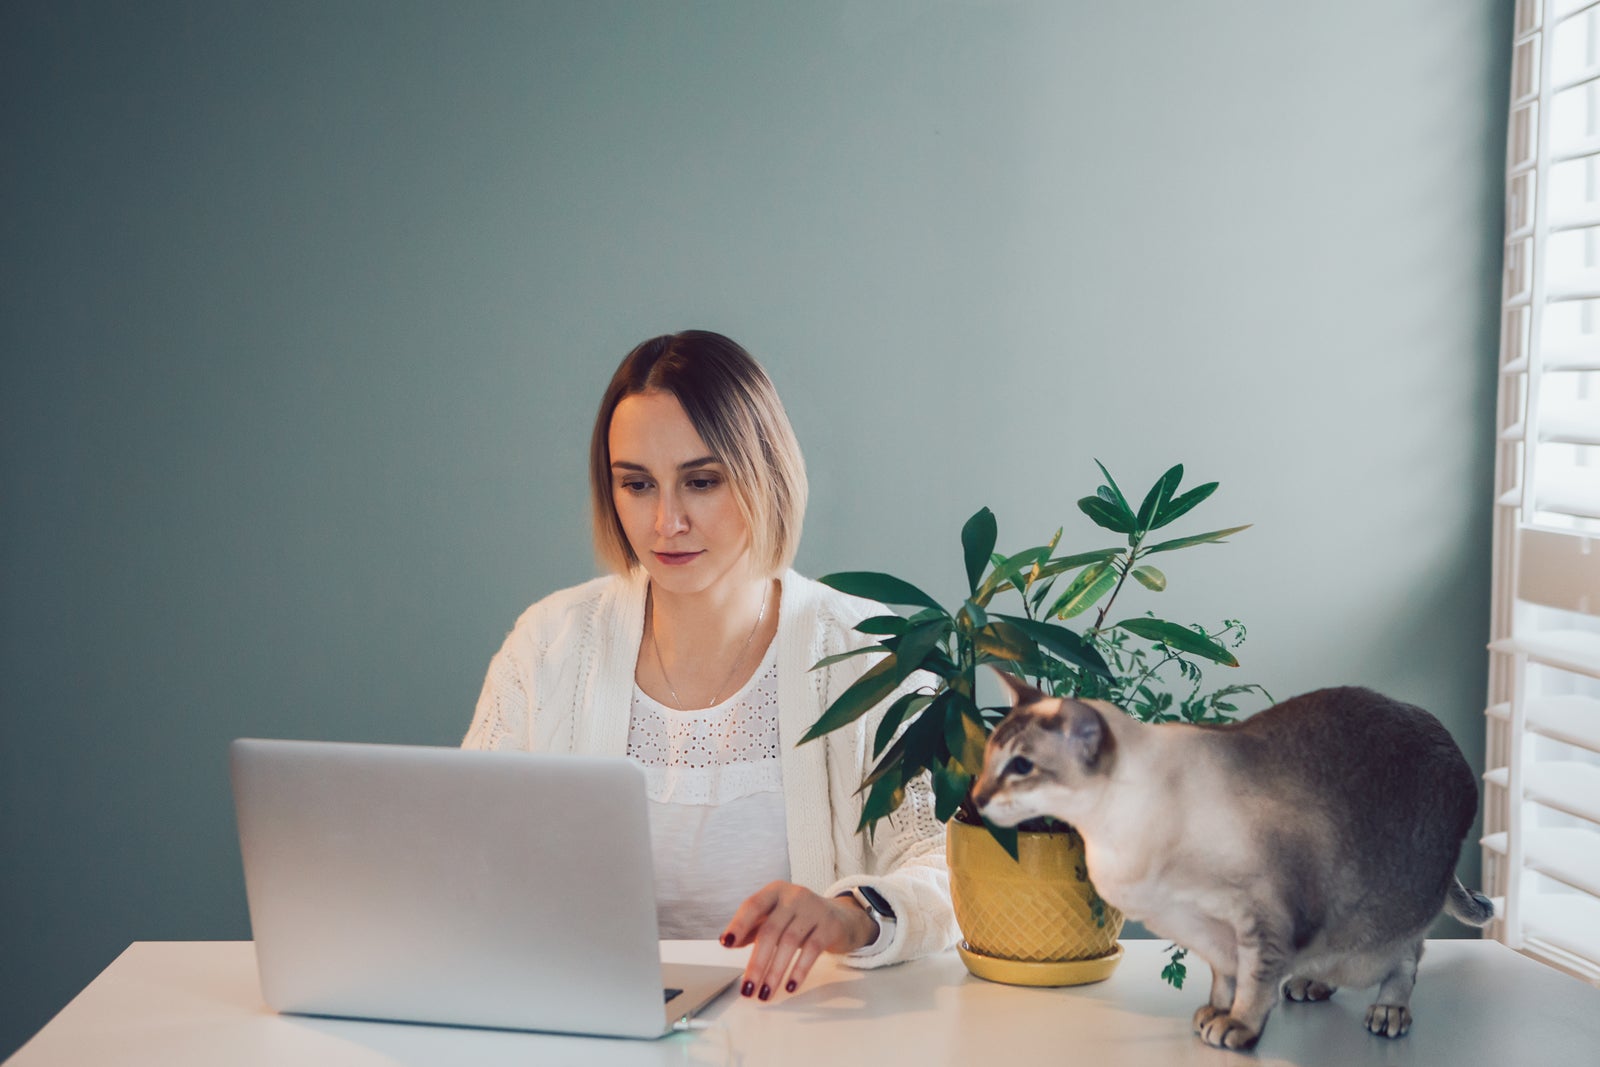 Caucasian business woman working on laptop computer. Freelancer working remotely on Internet from home office. Home domestic animal cat pet on table. Freelance, job and self-employment concept.